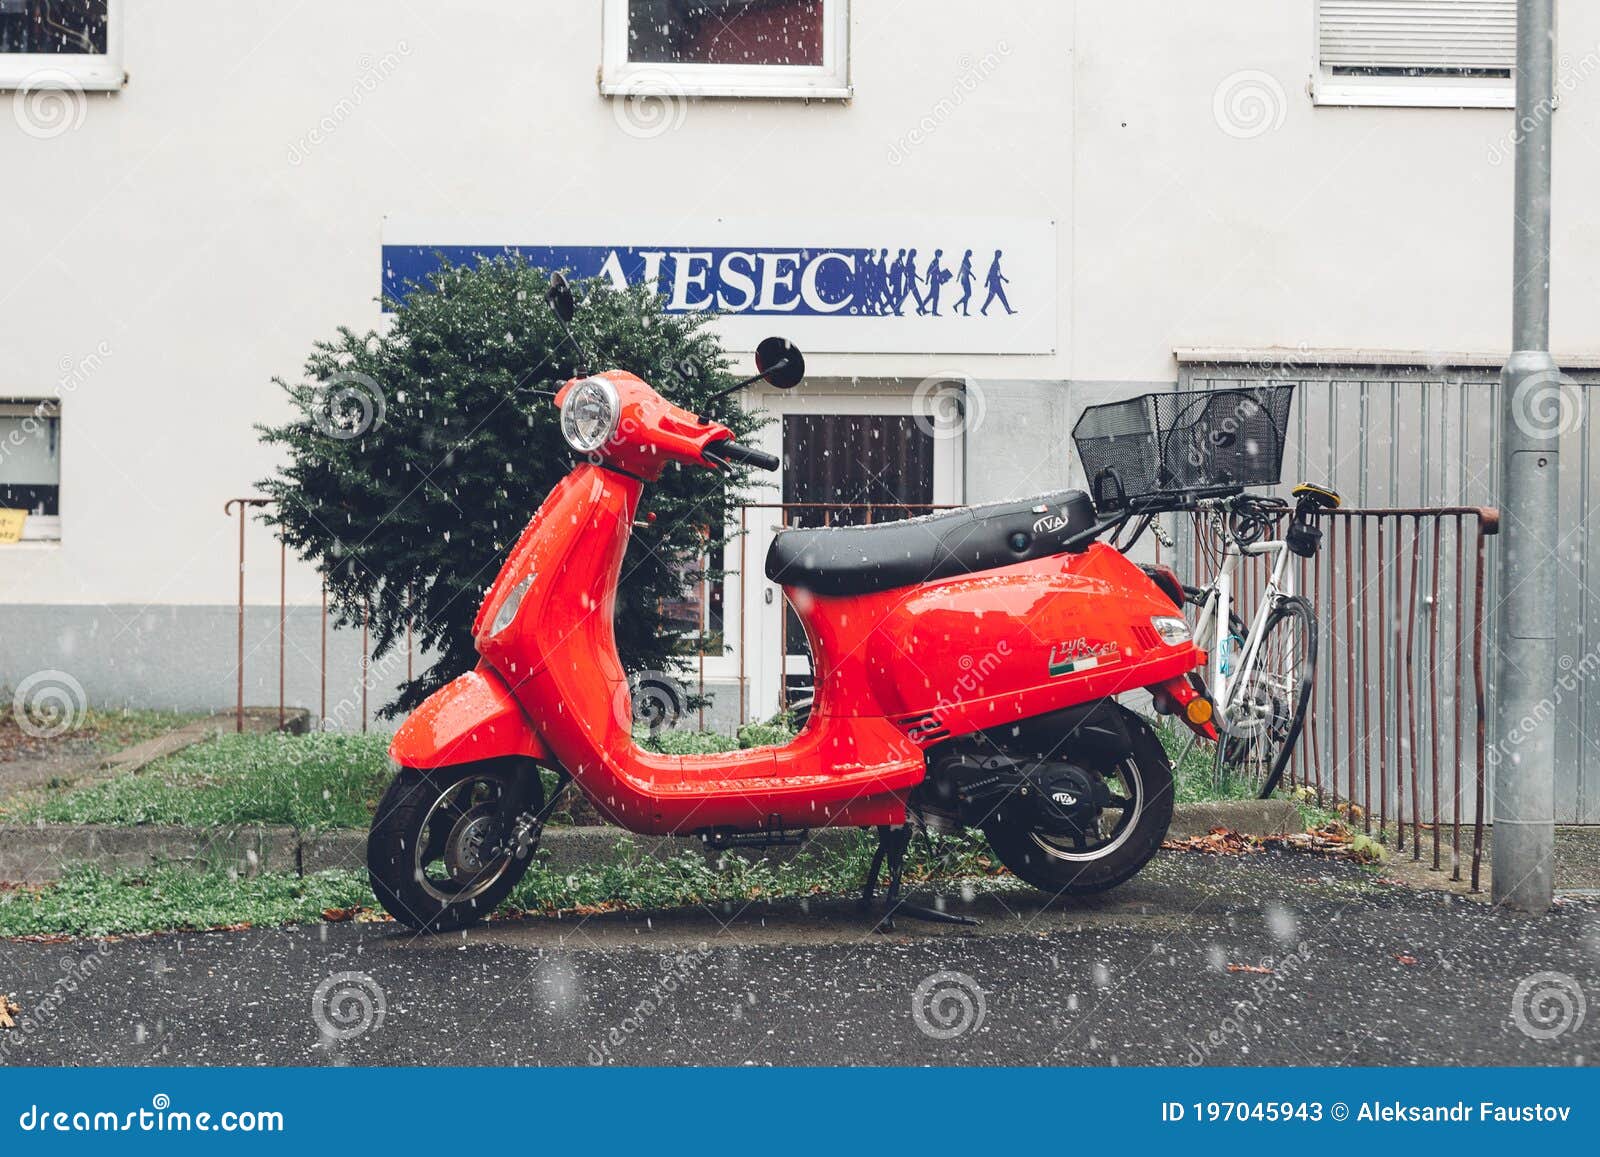 The Red IVA Lux 50 Scooter on a in a German Town Stock Photo - Image of life, city: 197045943